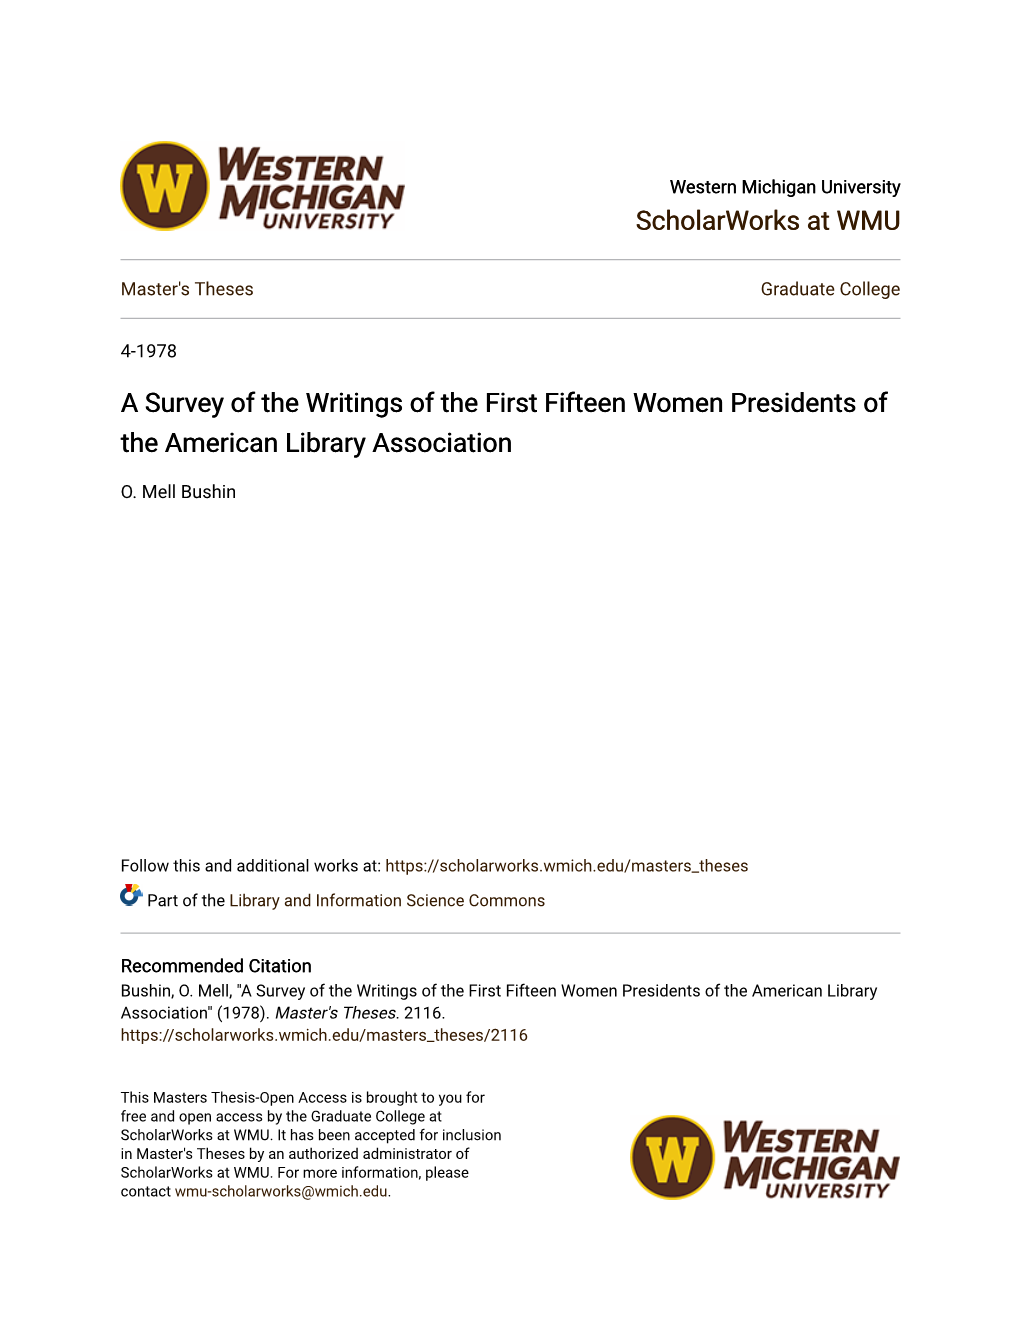 A Survey of the Writings of the First Fifteen Women Presidents of the American Library Association